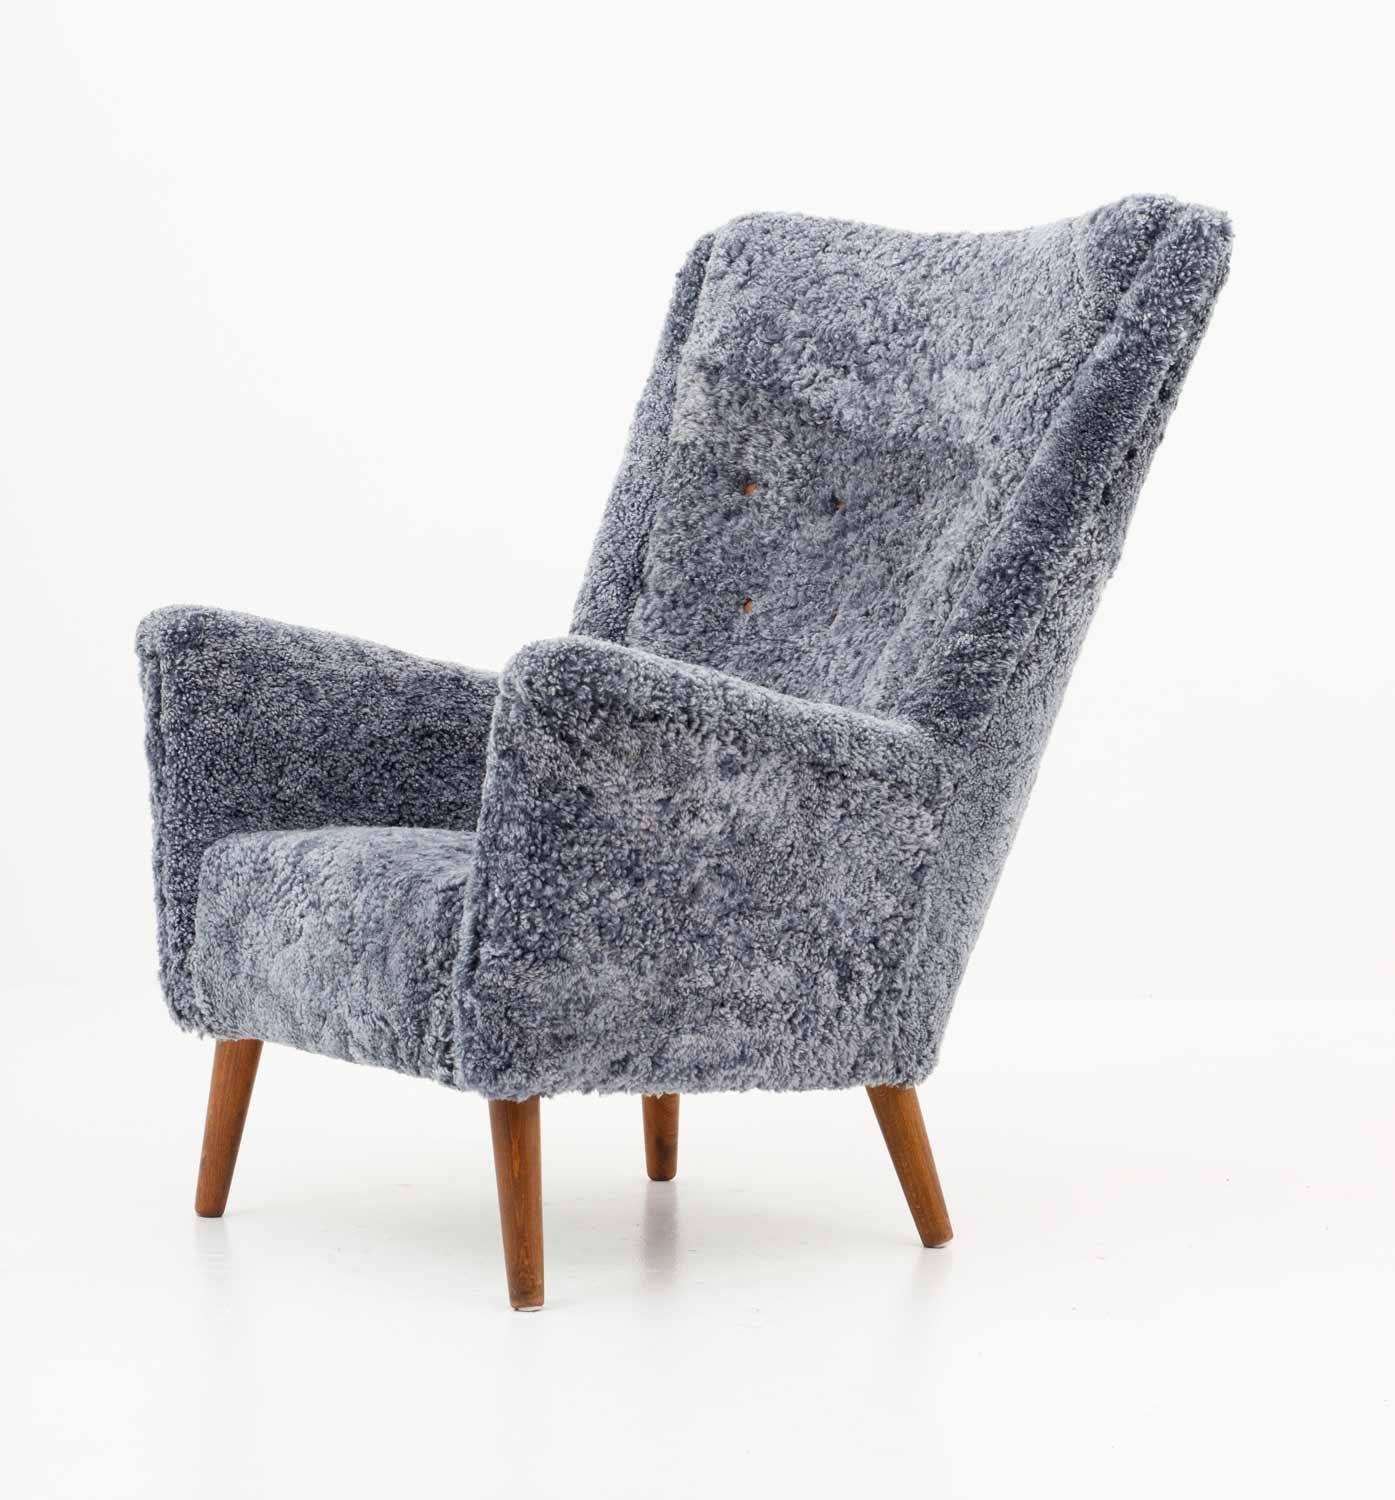 High back Scandinavian midcentury chair by unknown Danish manufacturer.
This majestic square-shaped chair looks great from any angle and, on top of that, is as comfortable as it looks. It was built with a high sence of quality and reminds a lot of